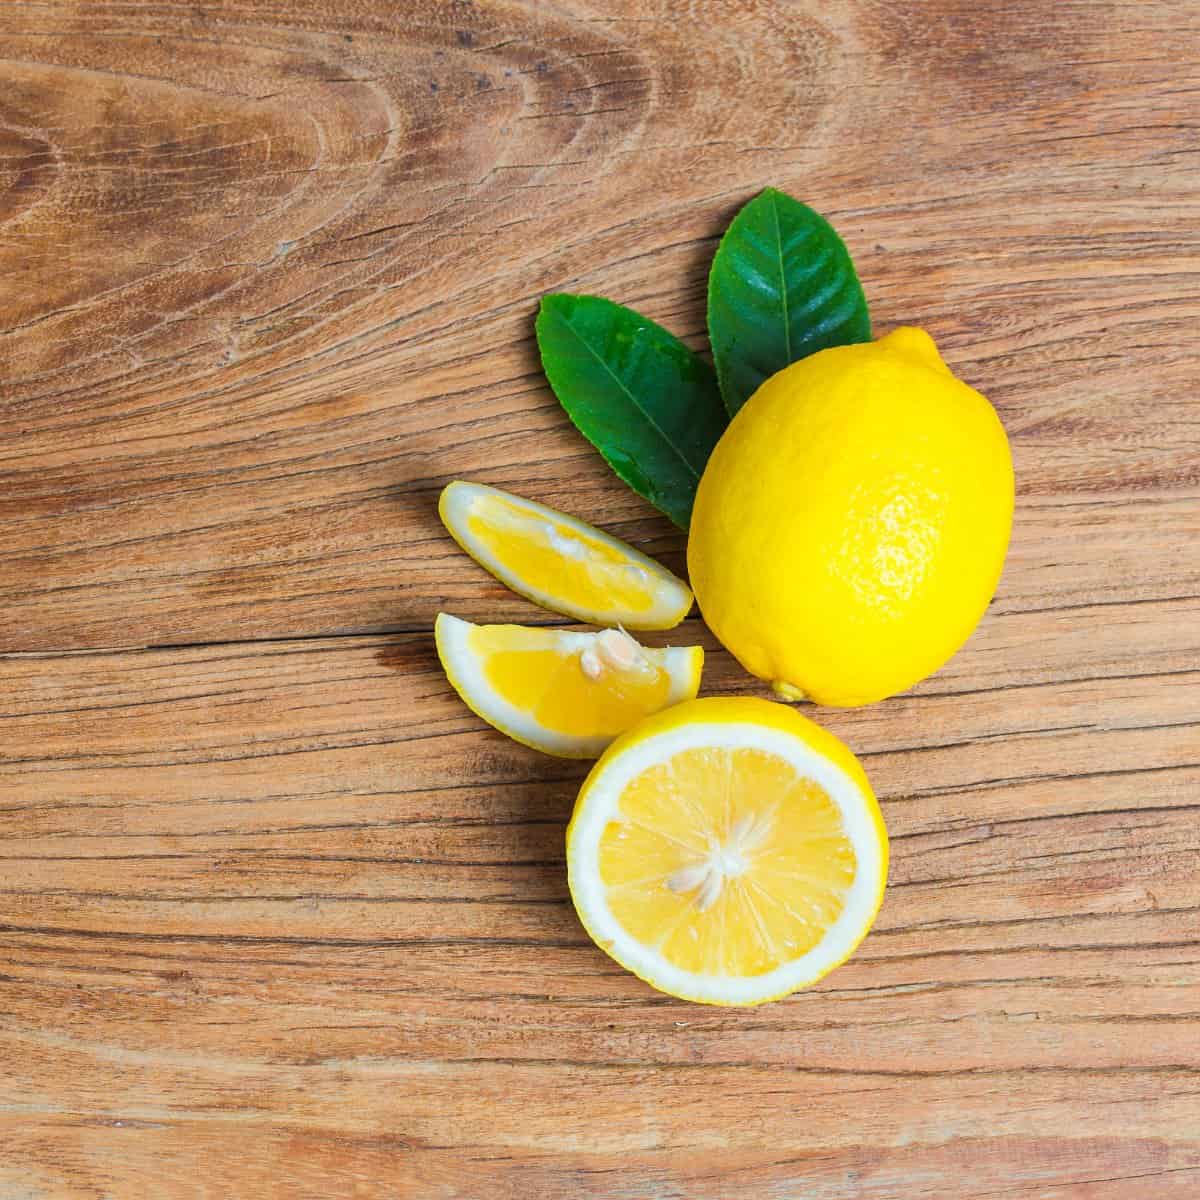 How to cook with lemons